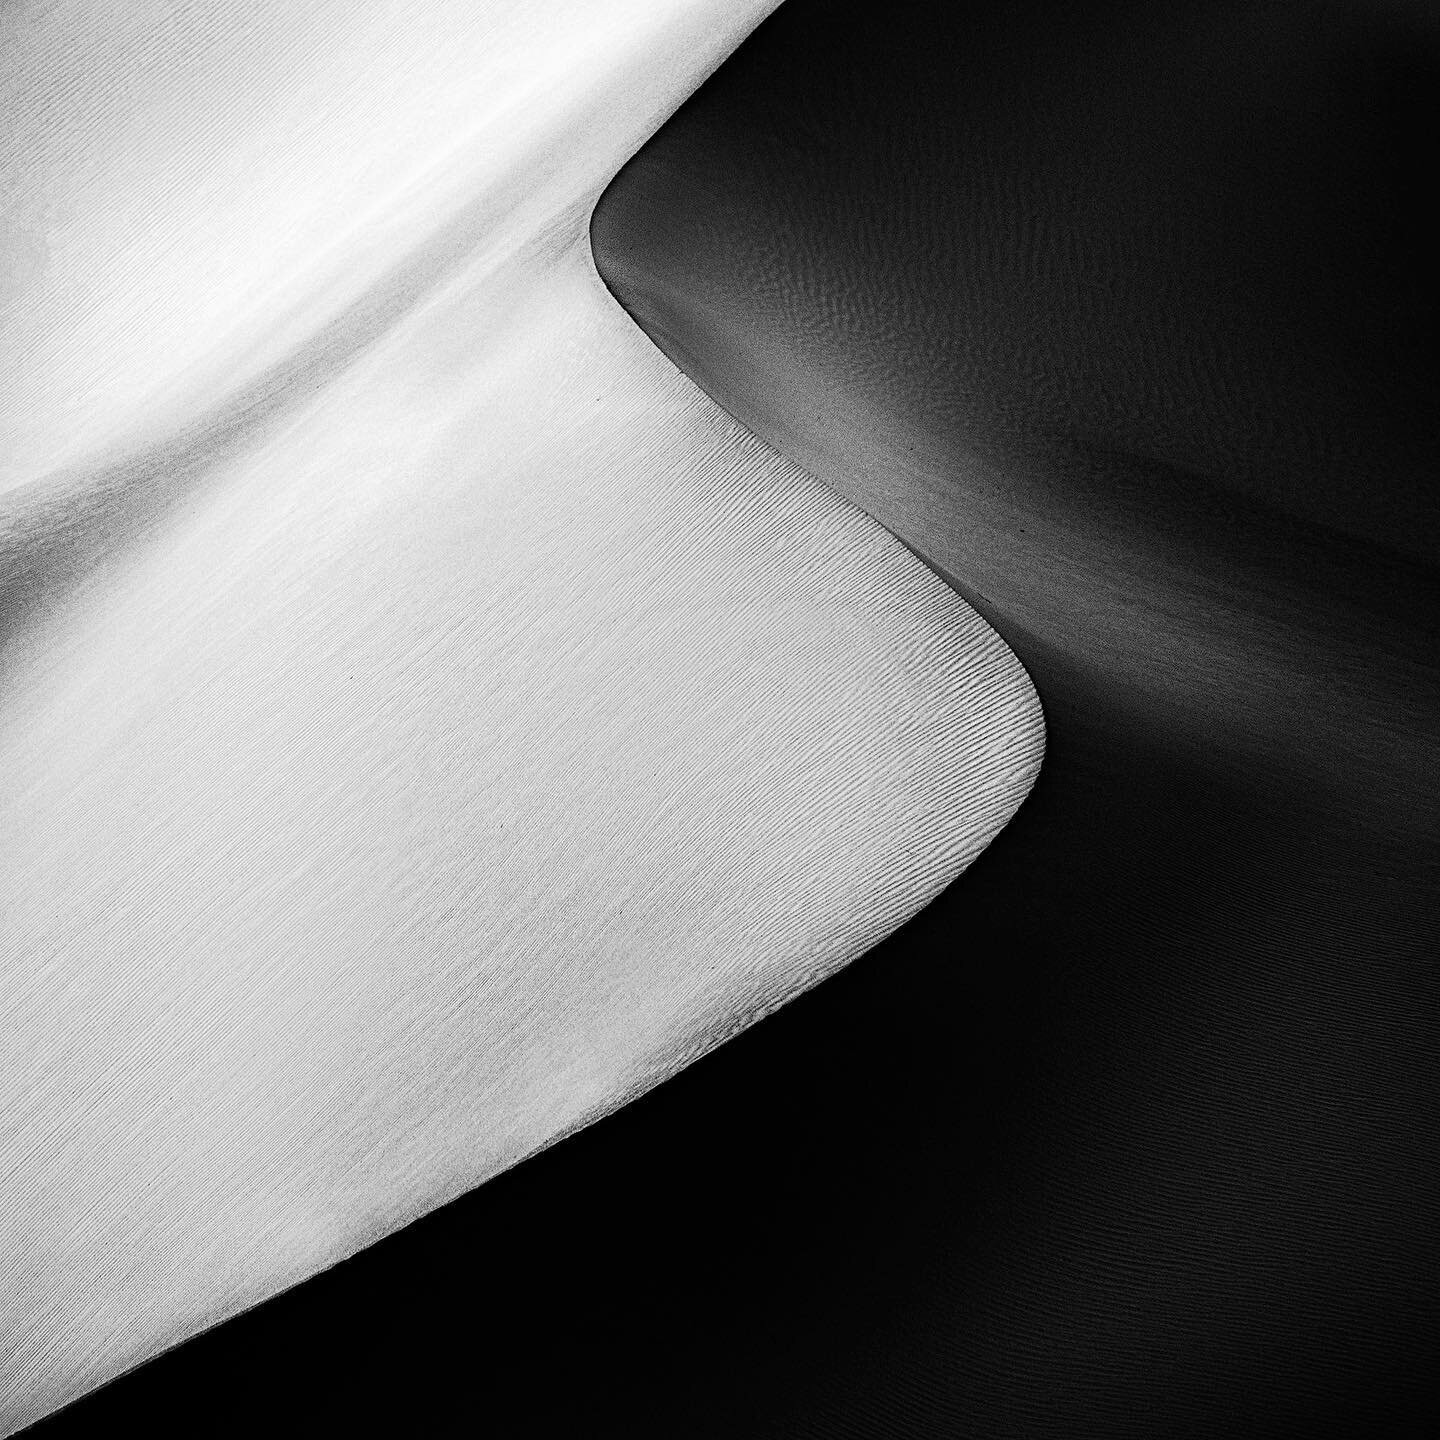 &ldquo;Voluptuosa .3&rdquo; this is another addition to the dunes series. &ldquo;Voluptuosa&rdquo; is all about low frequency and big long curves, hence the name. I hope you are enjoying it. I am slow at creating. I overthink things, and what&rsquo;s